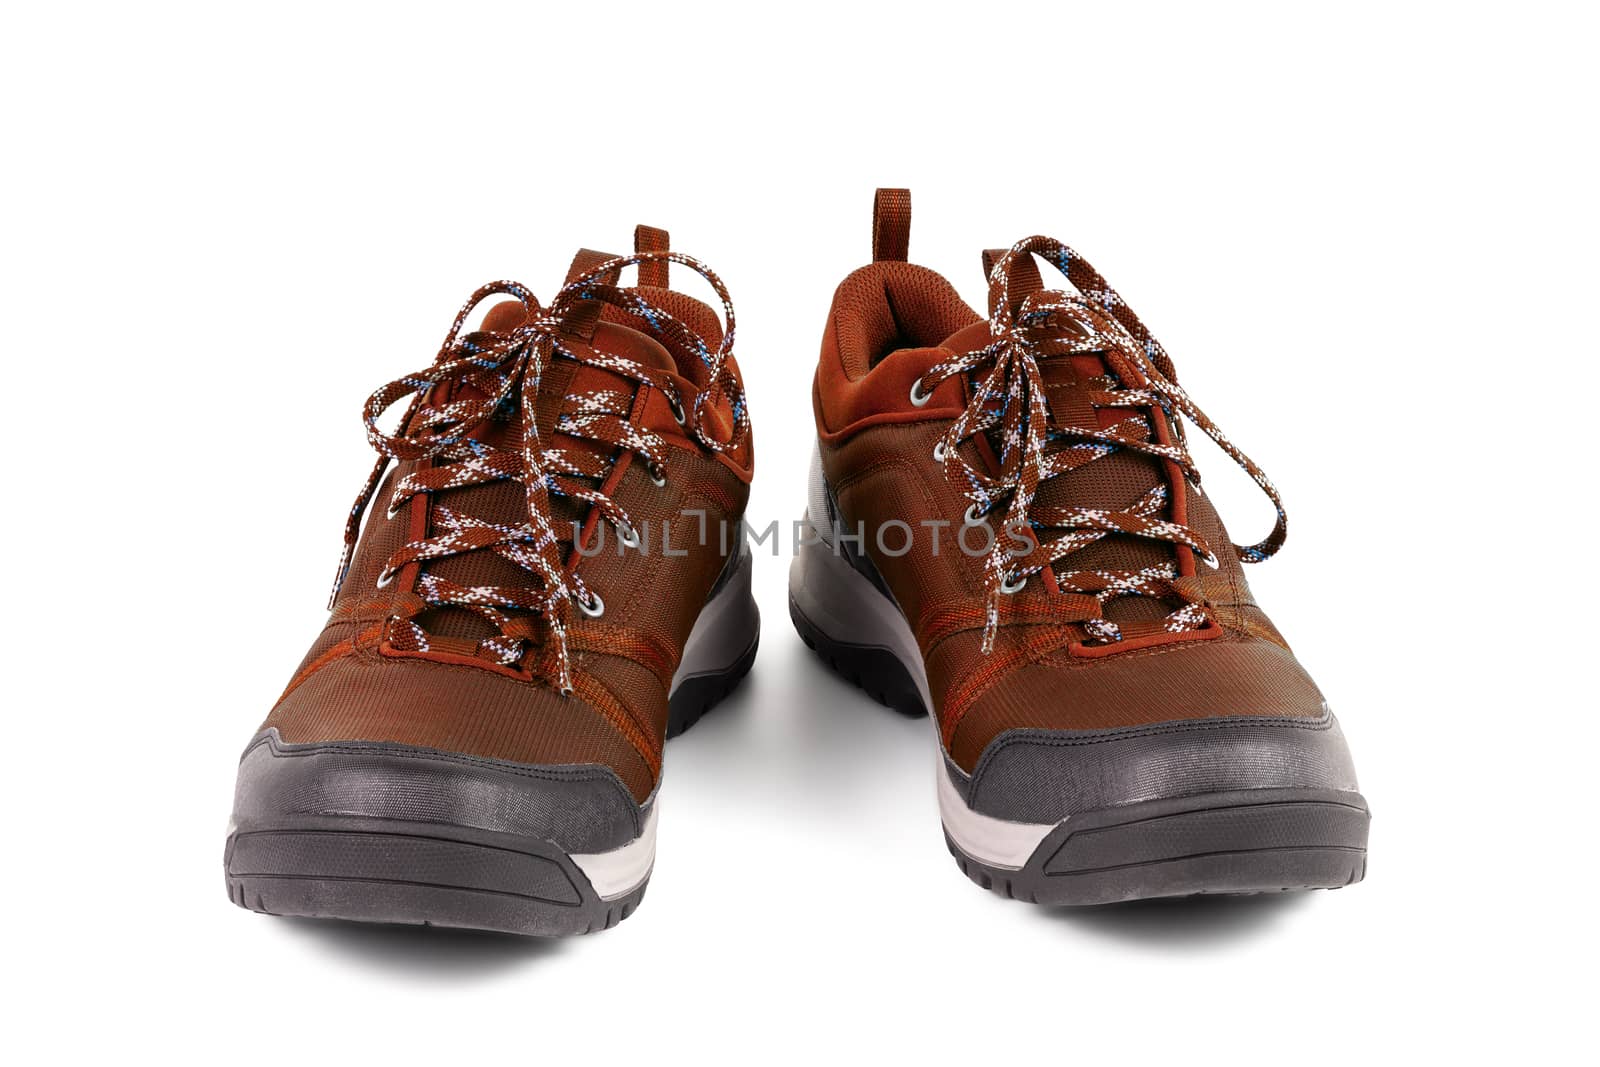 black and brown outdoor empty lightweight waterproof breathable fabric sneakers isolated on white background.